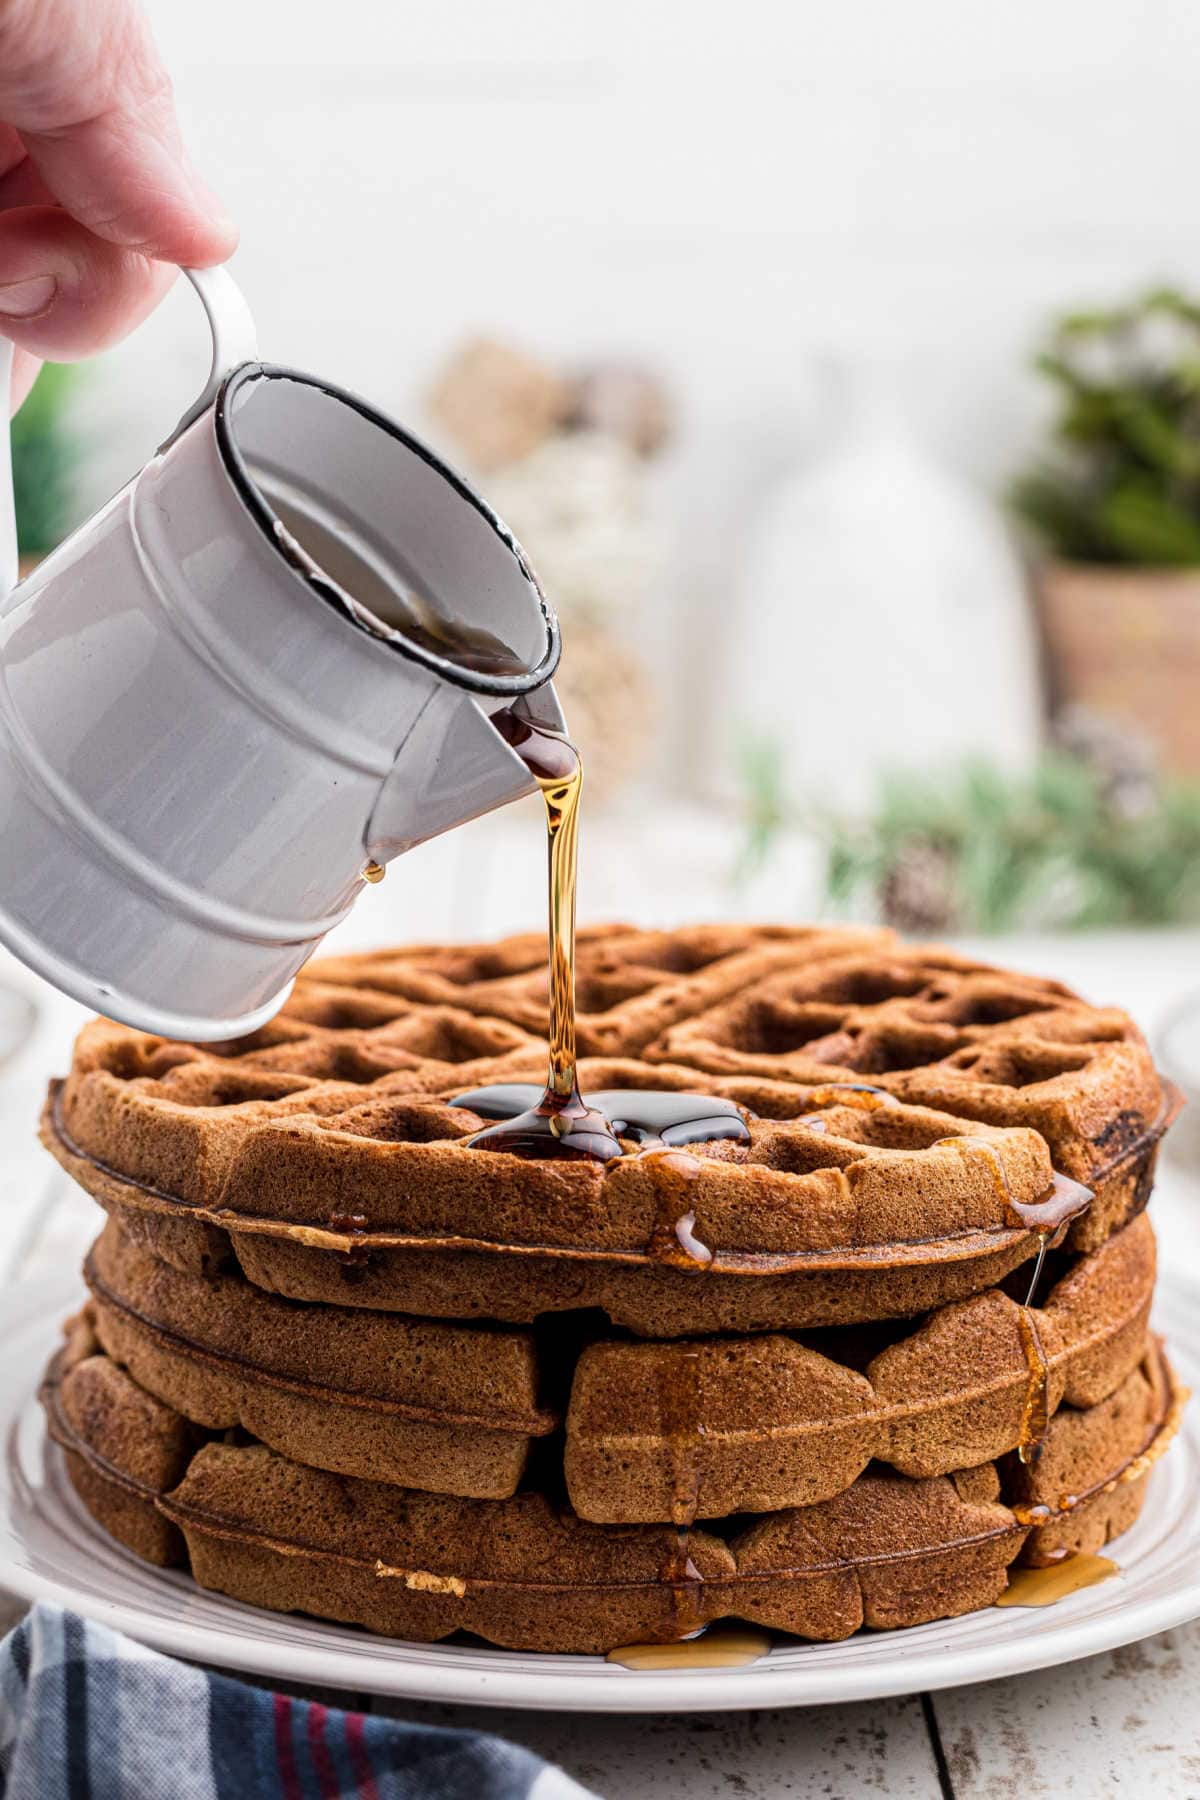 Syrup being poured on the waffles.